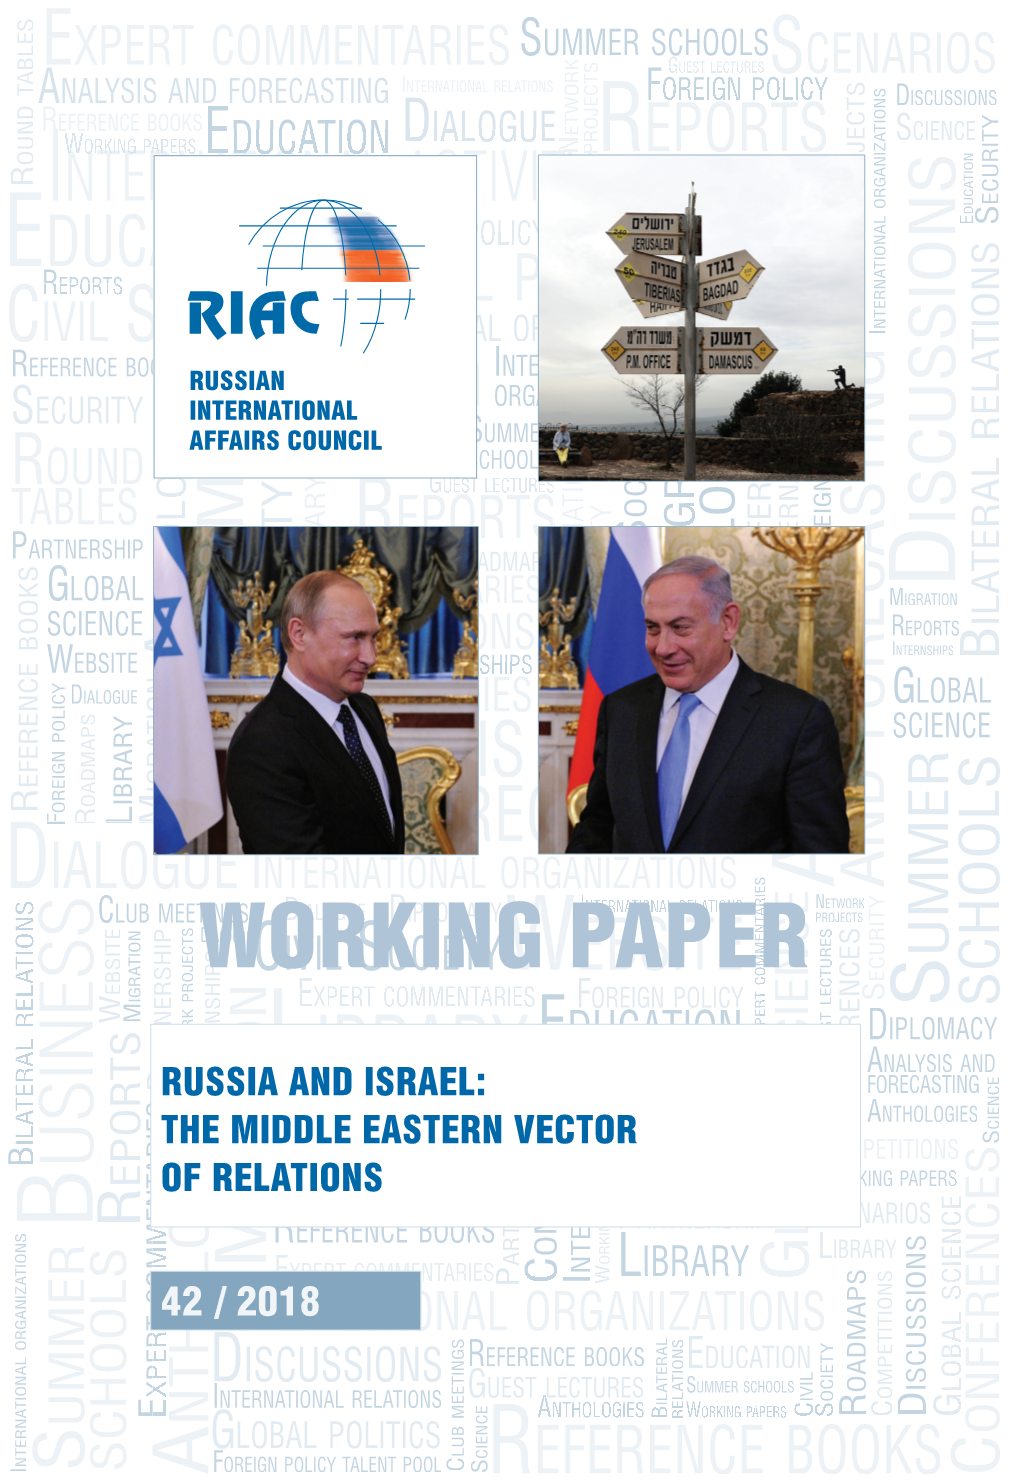 Russia and Israel: the Middle Eastern Vector of Relations